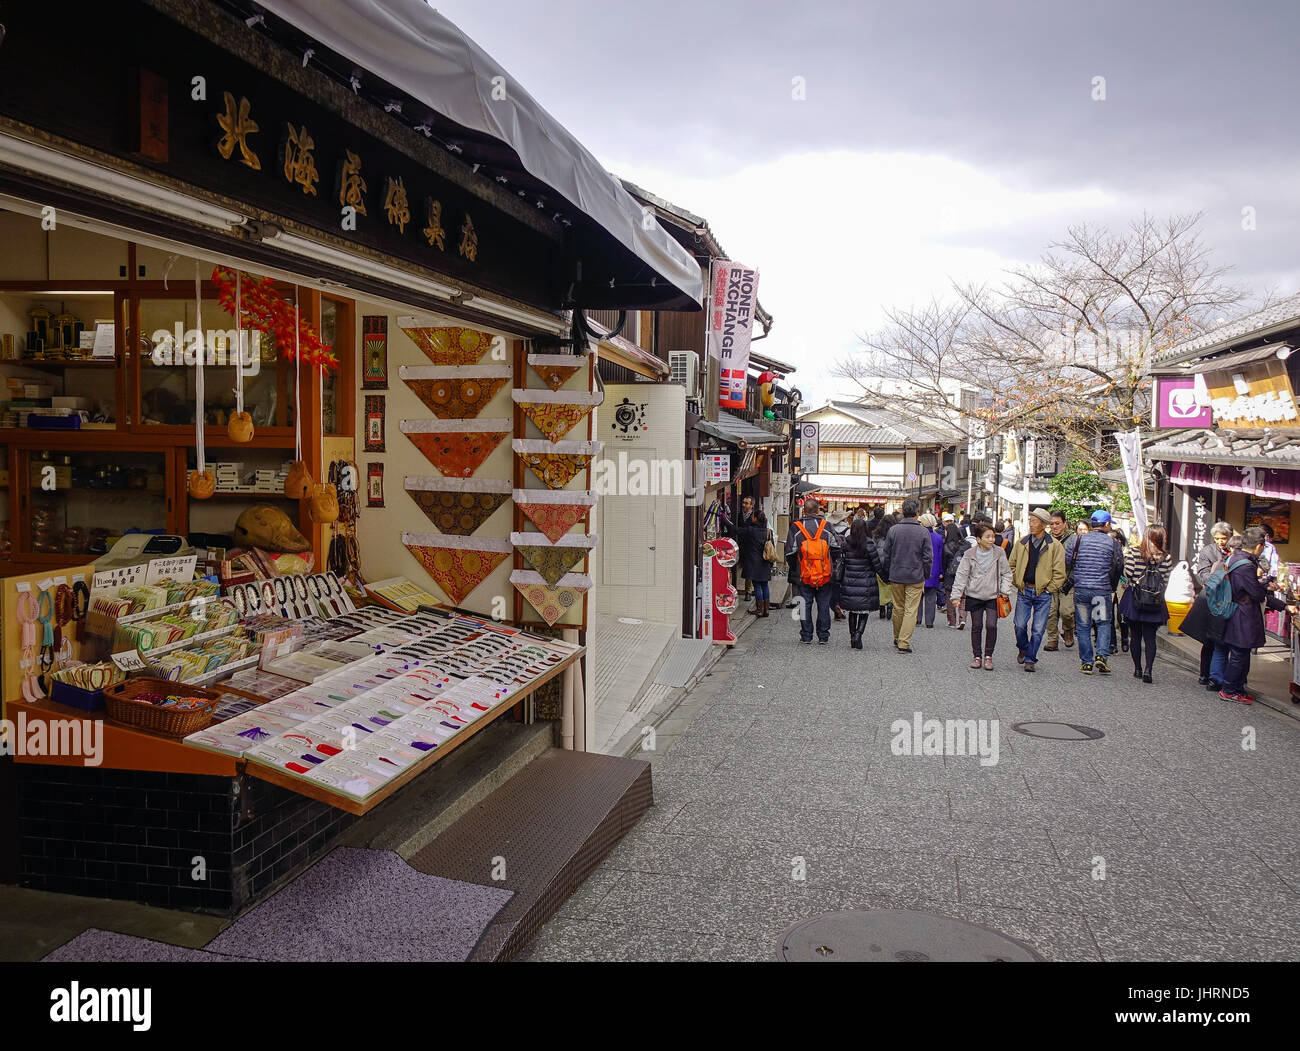 Kyoto, Japan - Nov 29, 2016. People walking on street at old town in Kyoto, Japan. Kyoto was the capital of Japan for over a millennium, and carries a Stock Photo